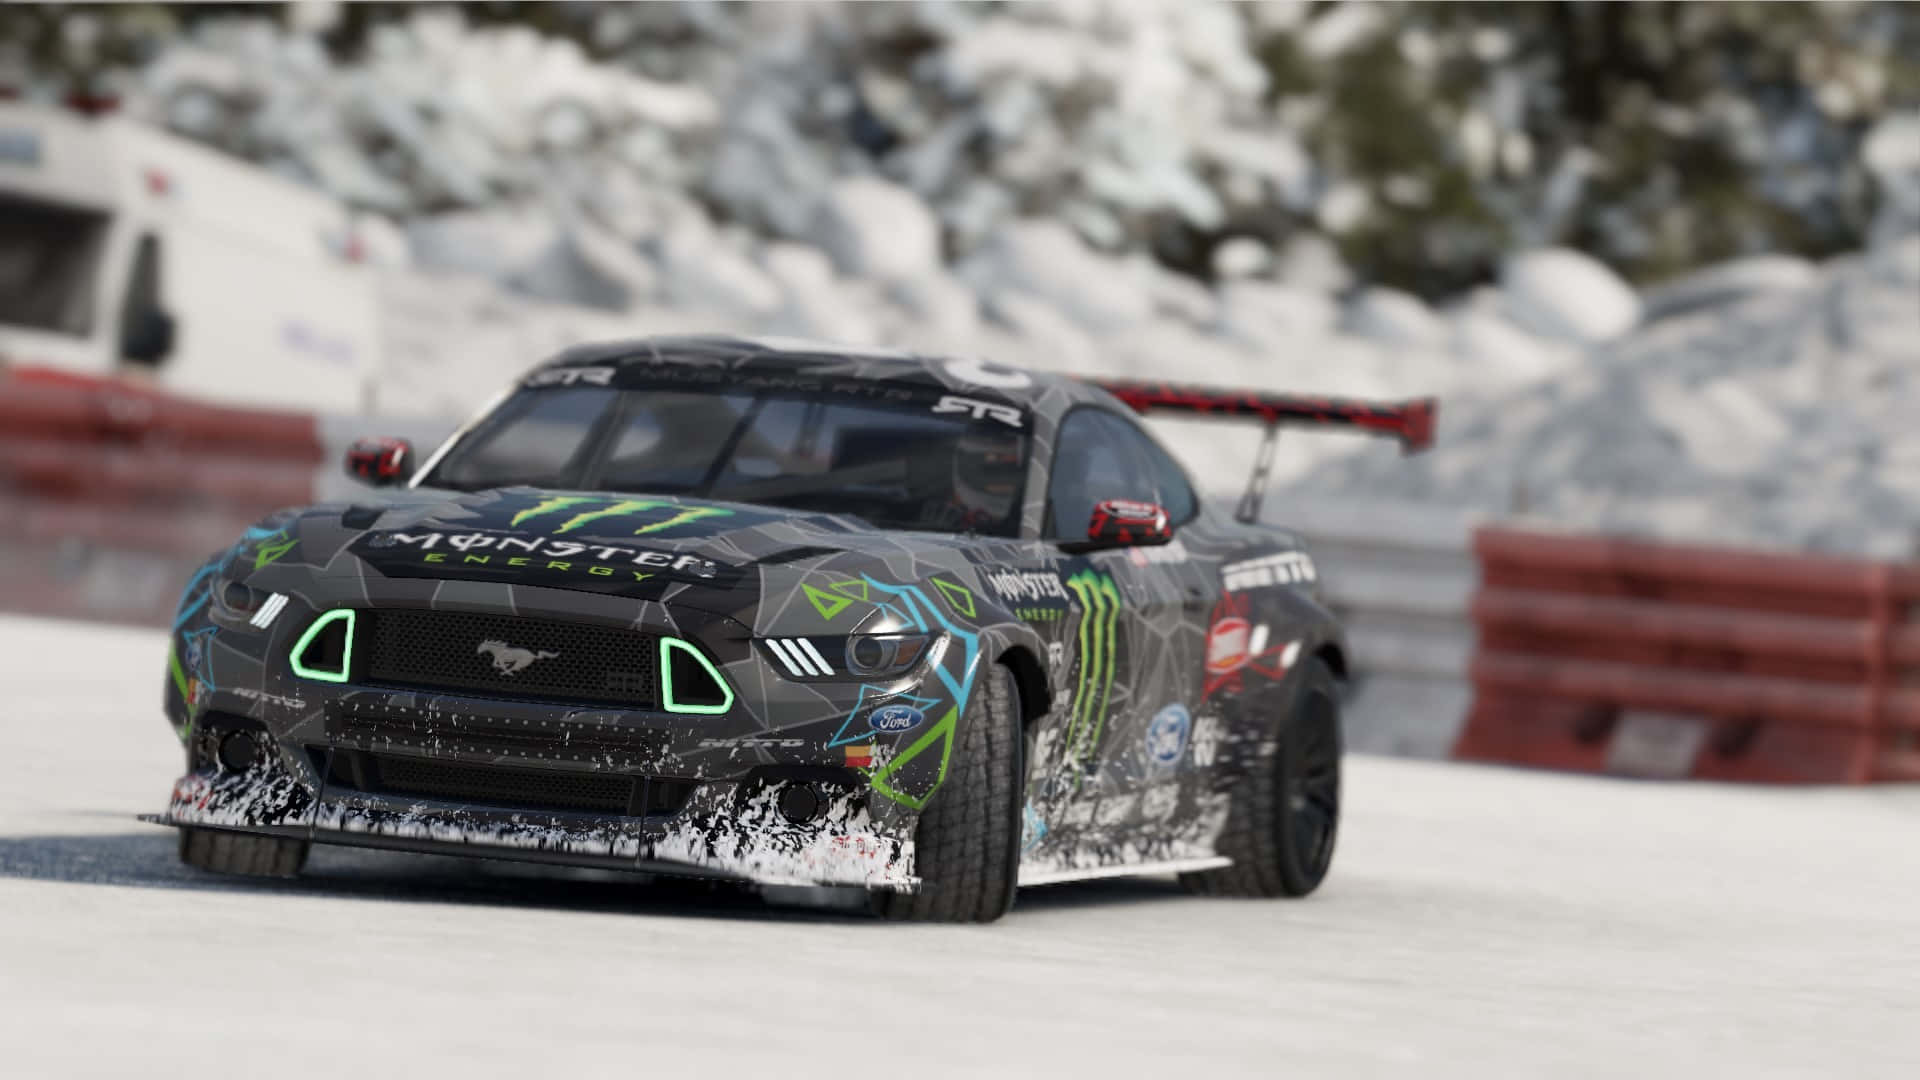 Rev up the engine and buckle up for the fierce experience of HD Project Cars 2